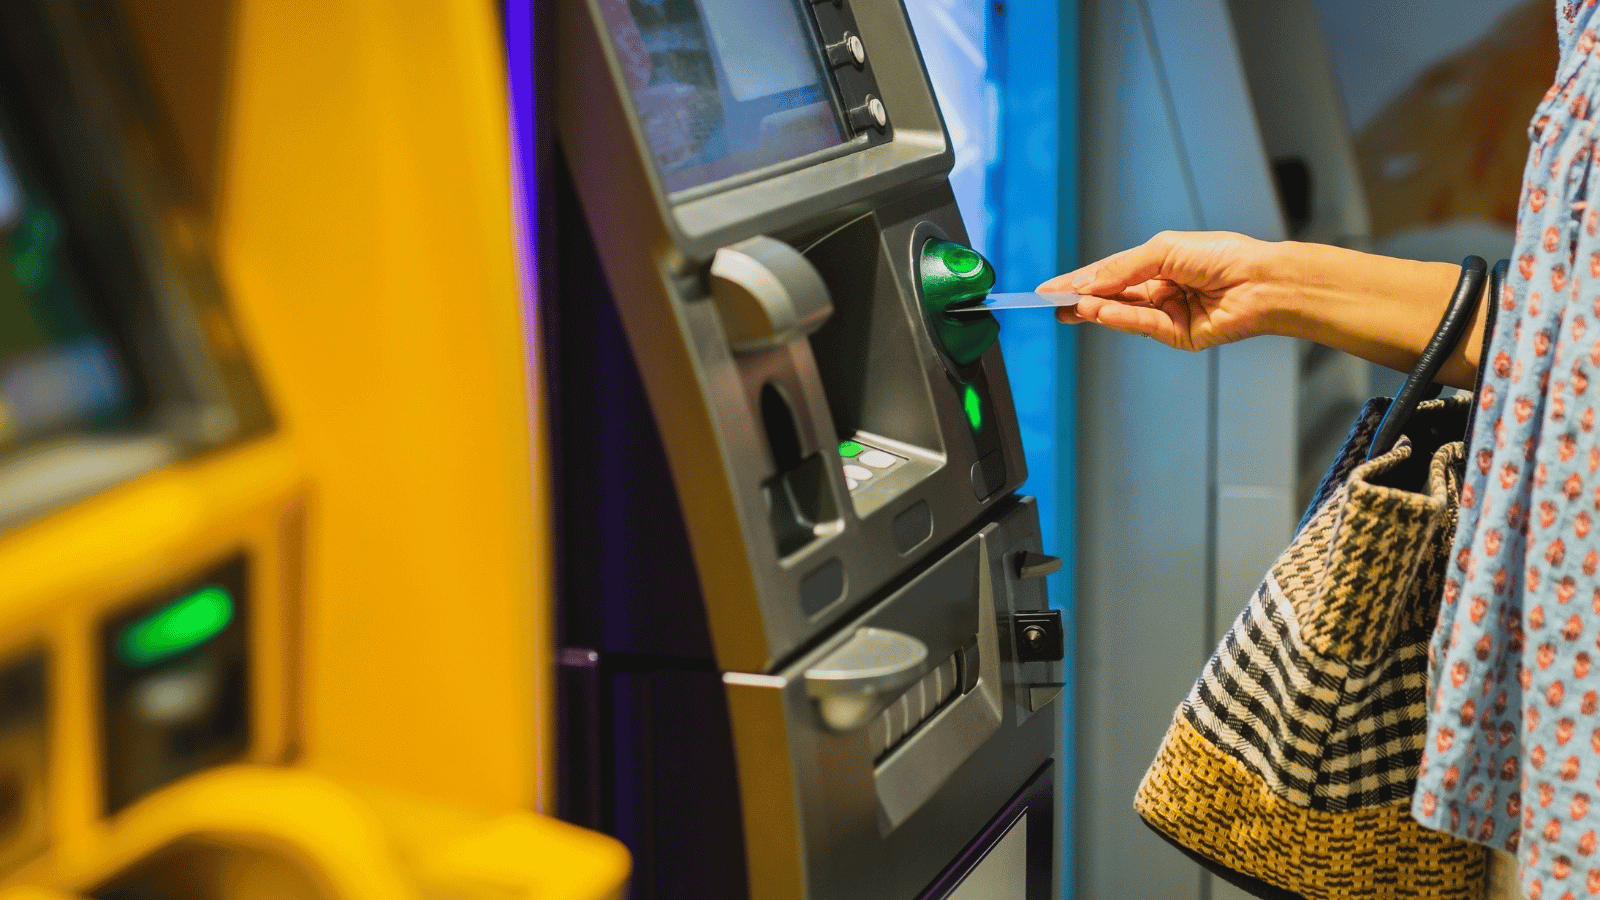 a woman is inserting a credit card into an atm machine .